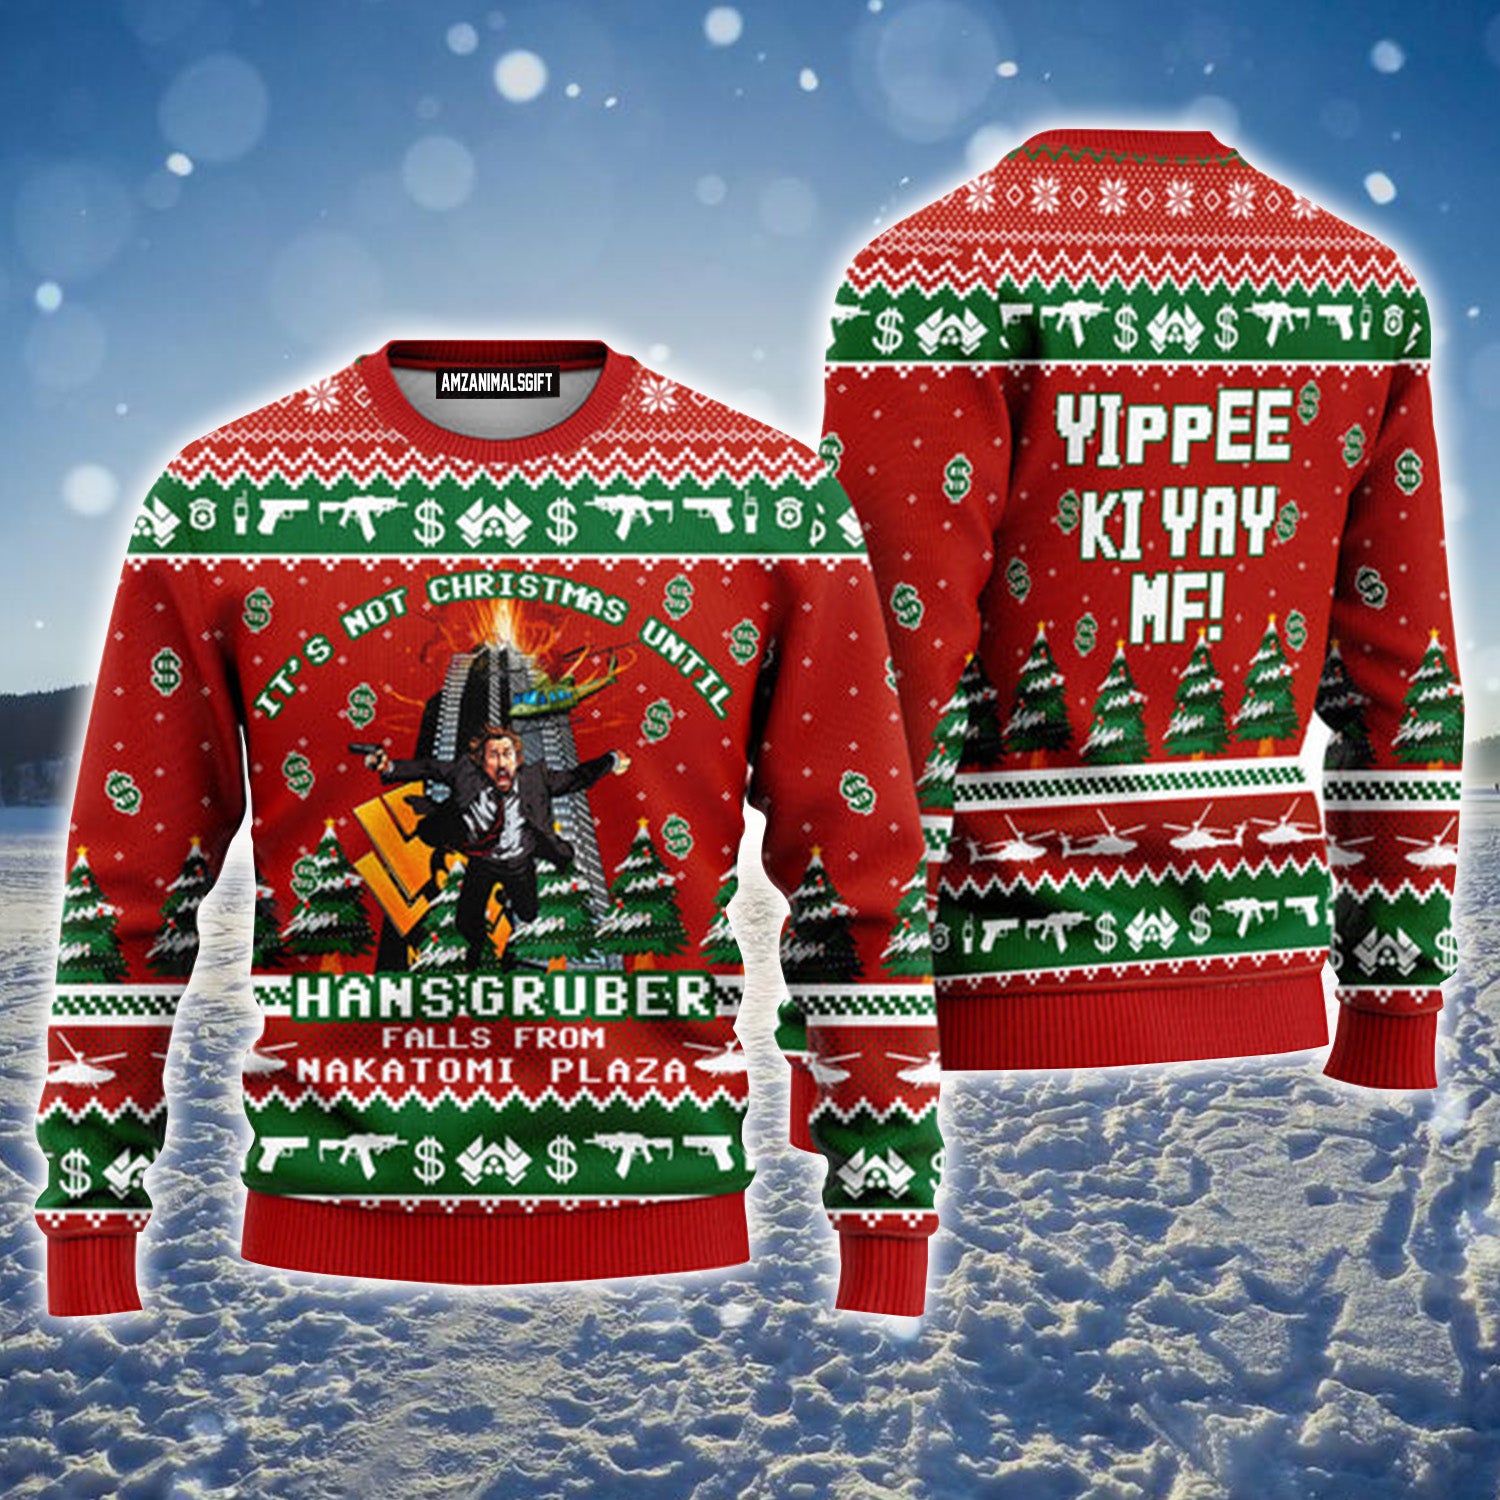 Nakatomi Plaza It's Not Christmas Until Fall Urly Christmas Sweater, Christmas Sweater For Men & Women - Perfect Gift For Christmas, Family, Friends